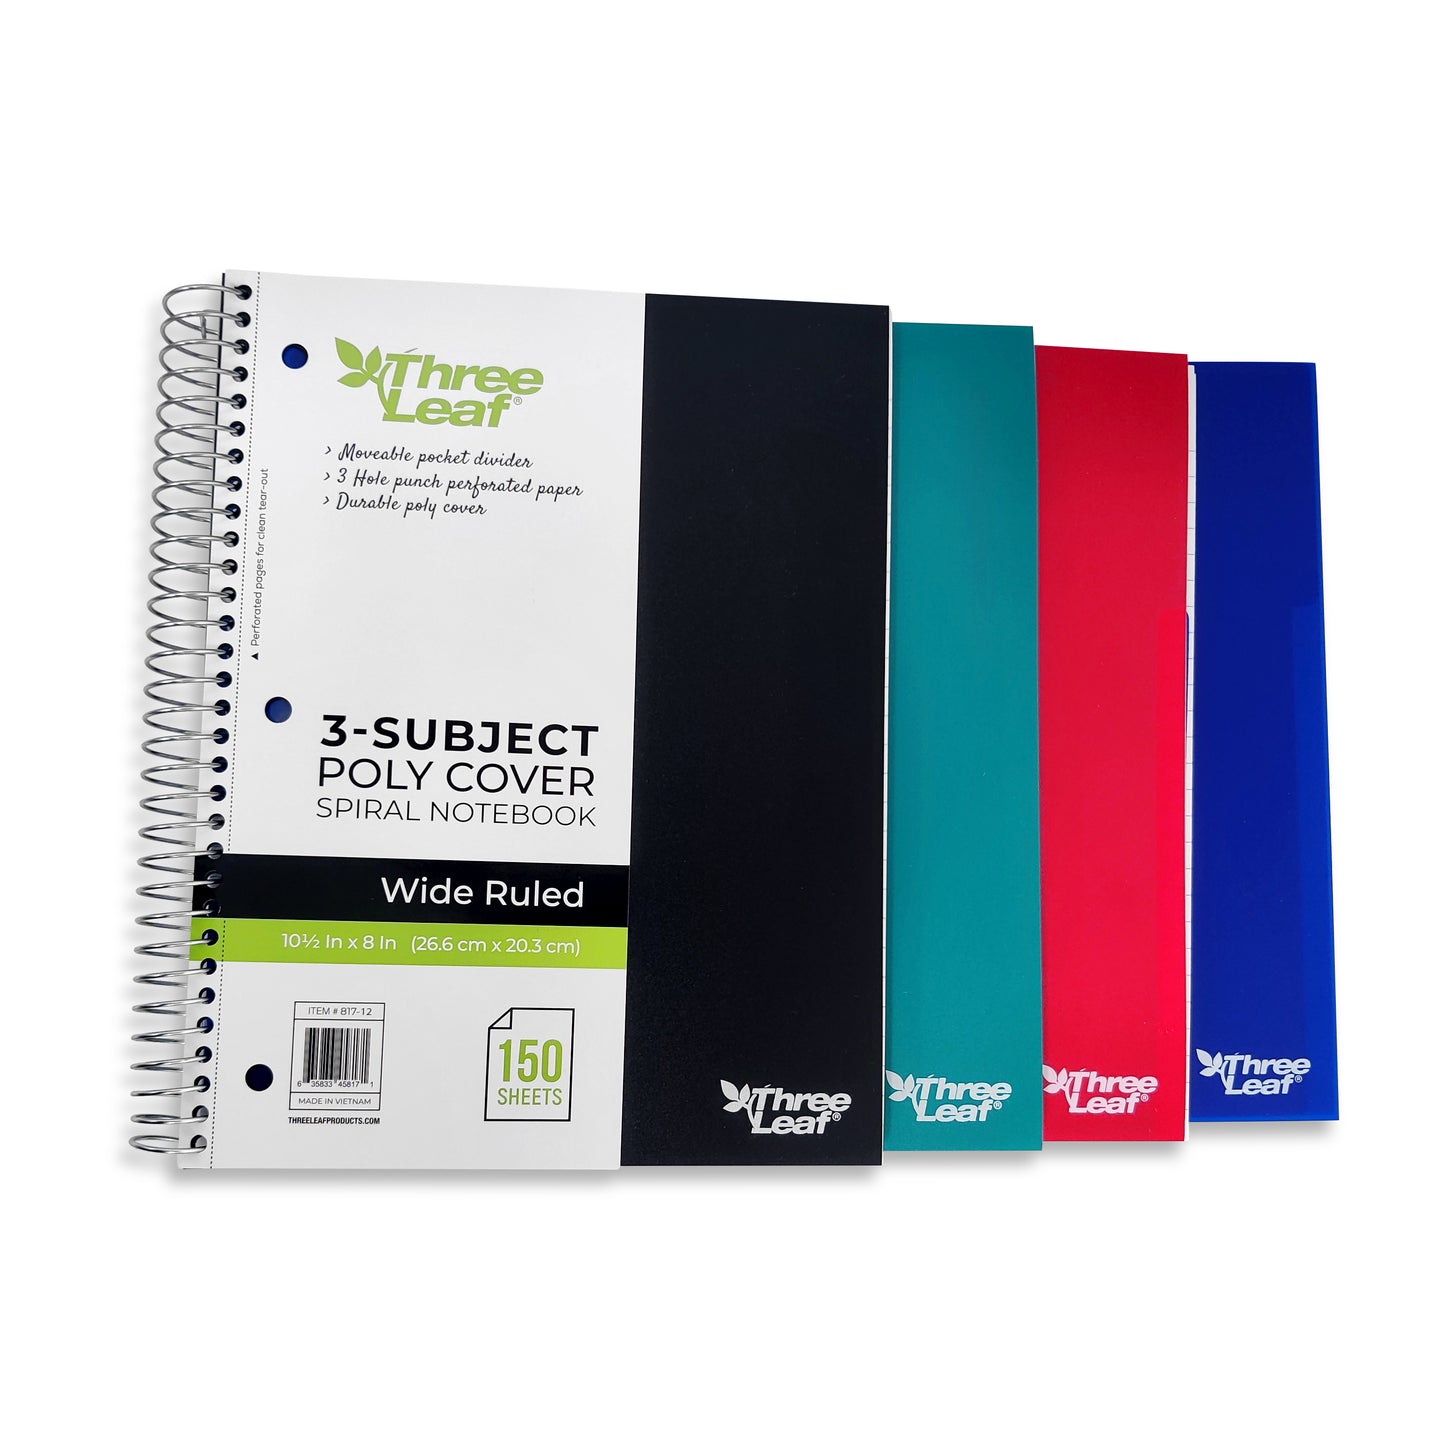 Three Leaf 150 Ct, 10 1/2 X 8,  3-Subject Poly Cover Spiral Notebooks, Wide Ruled, Pocket Divider, Black, Blue, Green, Red. (12 Units Per Case)